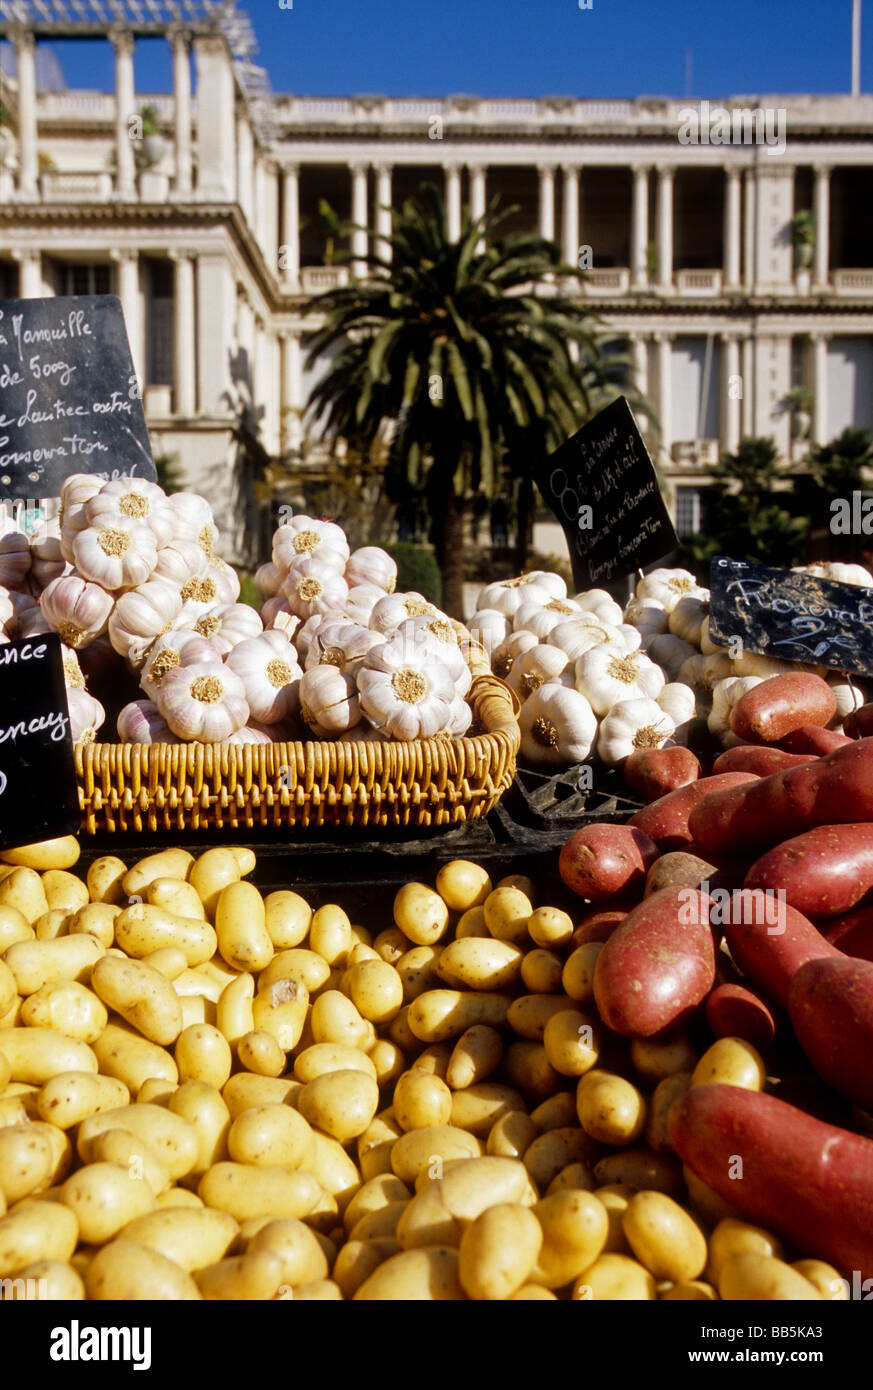 Provence market of Cours saleya in the heart of the old city of Nice France Europe Stock Photo